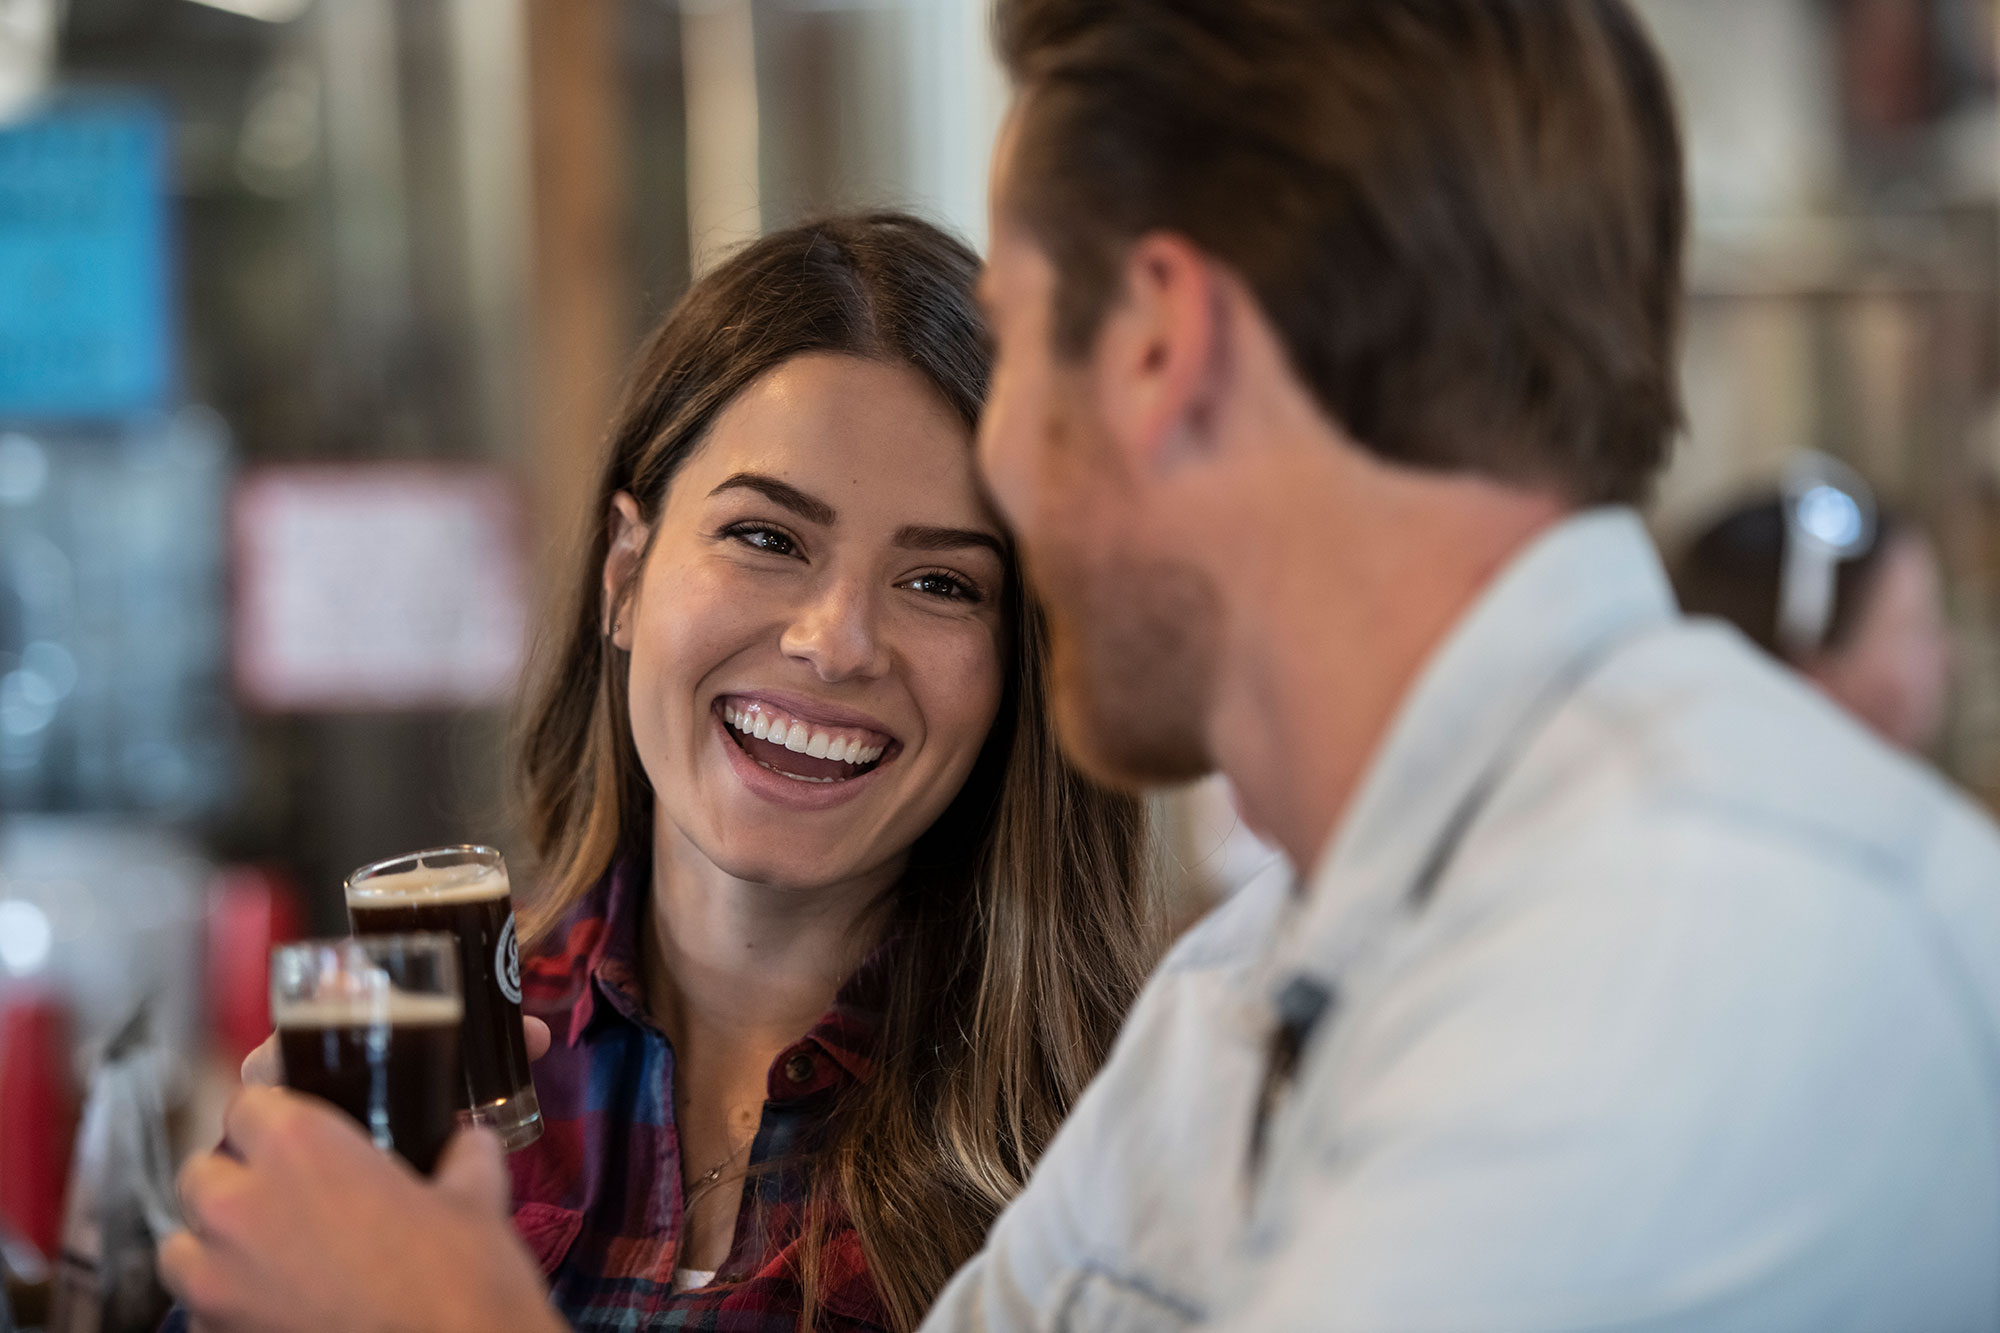 Couple smiling with flight taster beer glasses